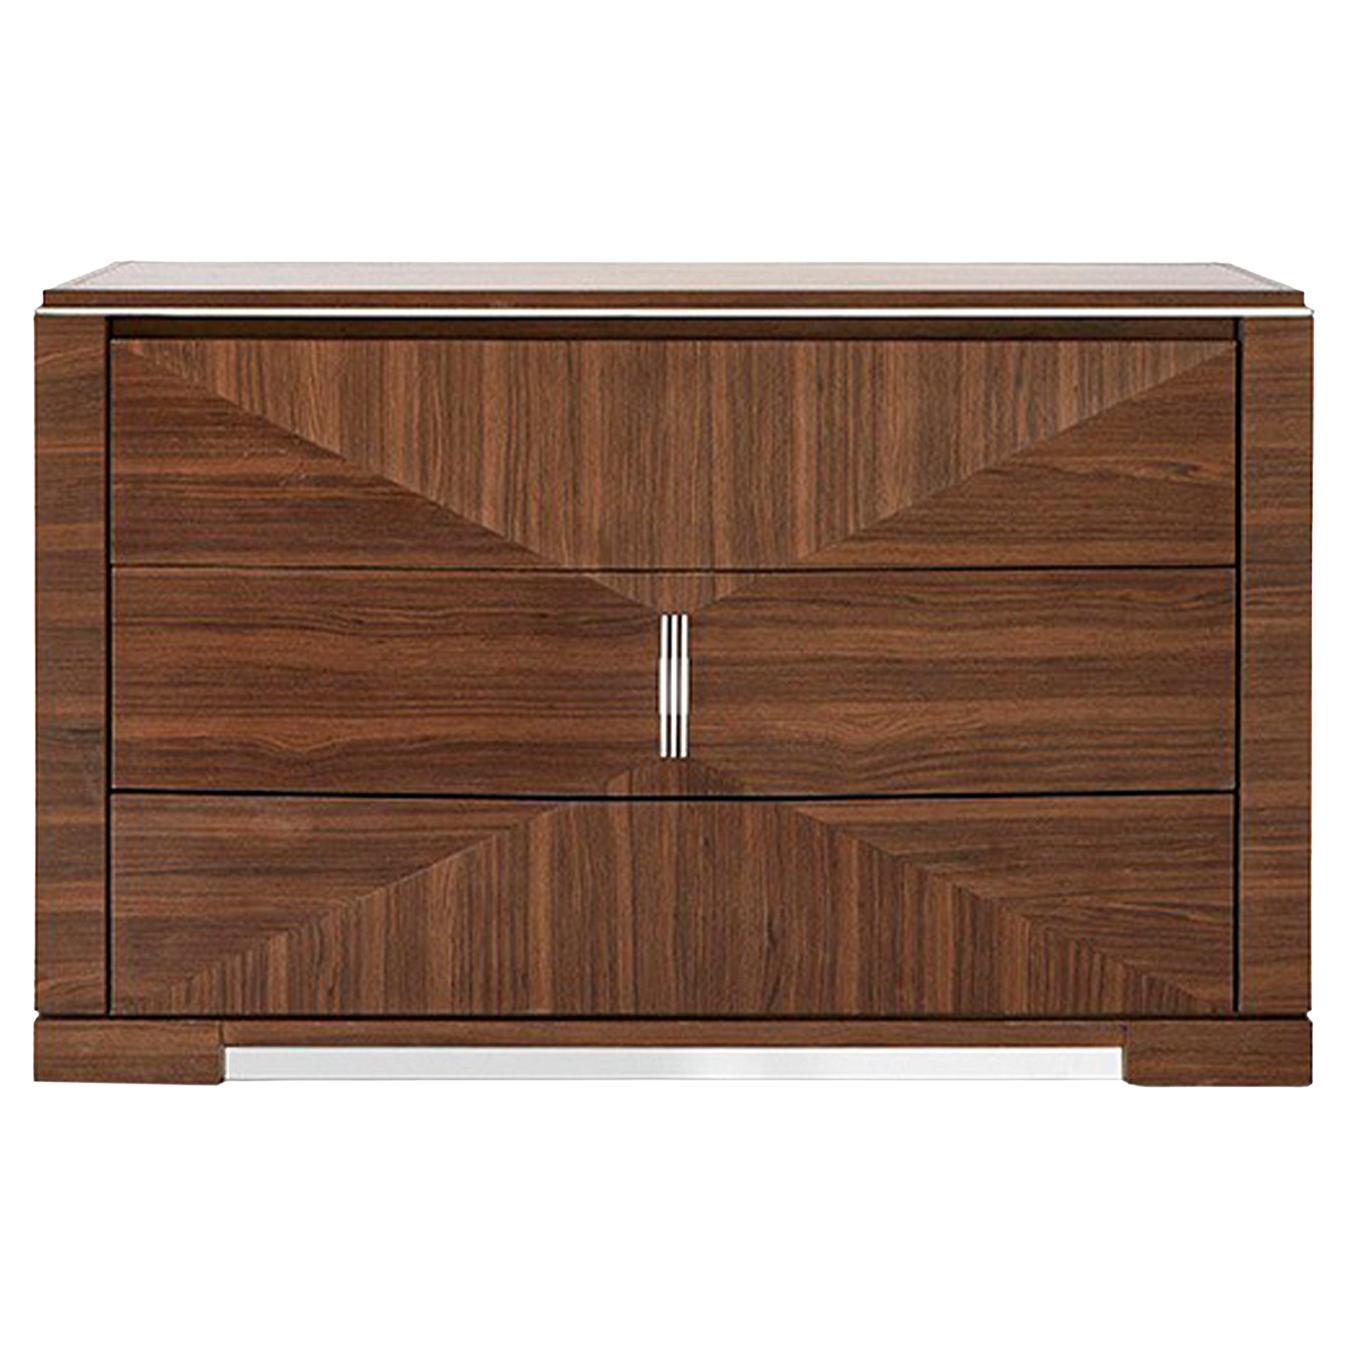 FB Collection Crystak Chest of 3 Drawers